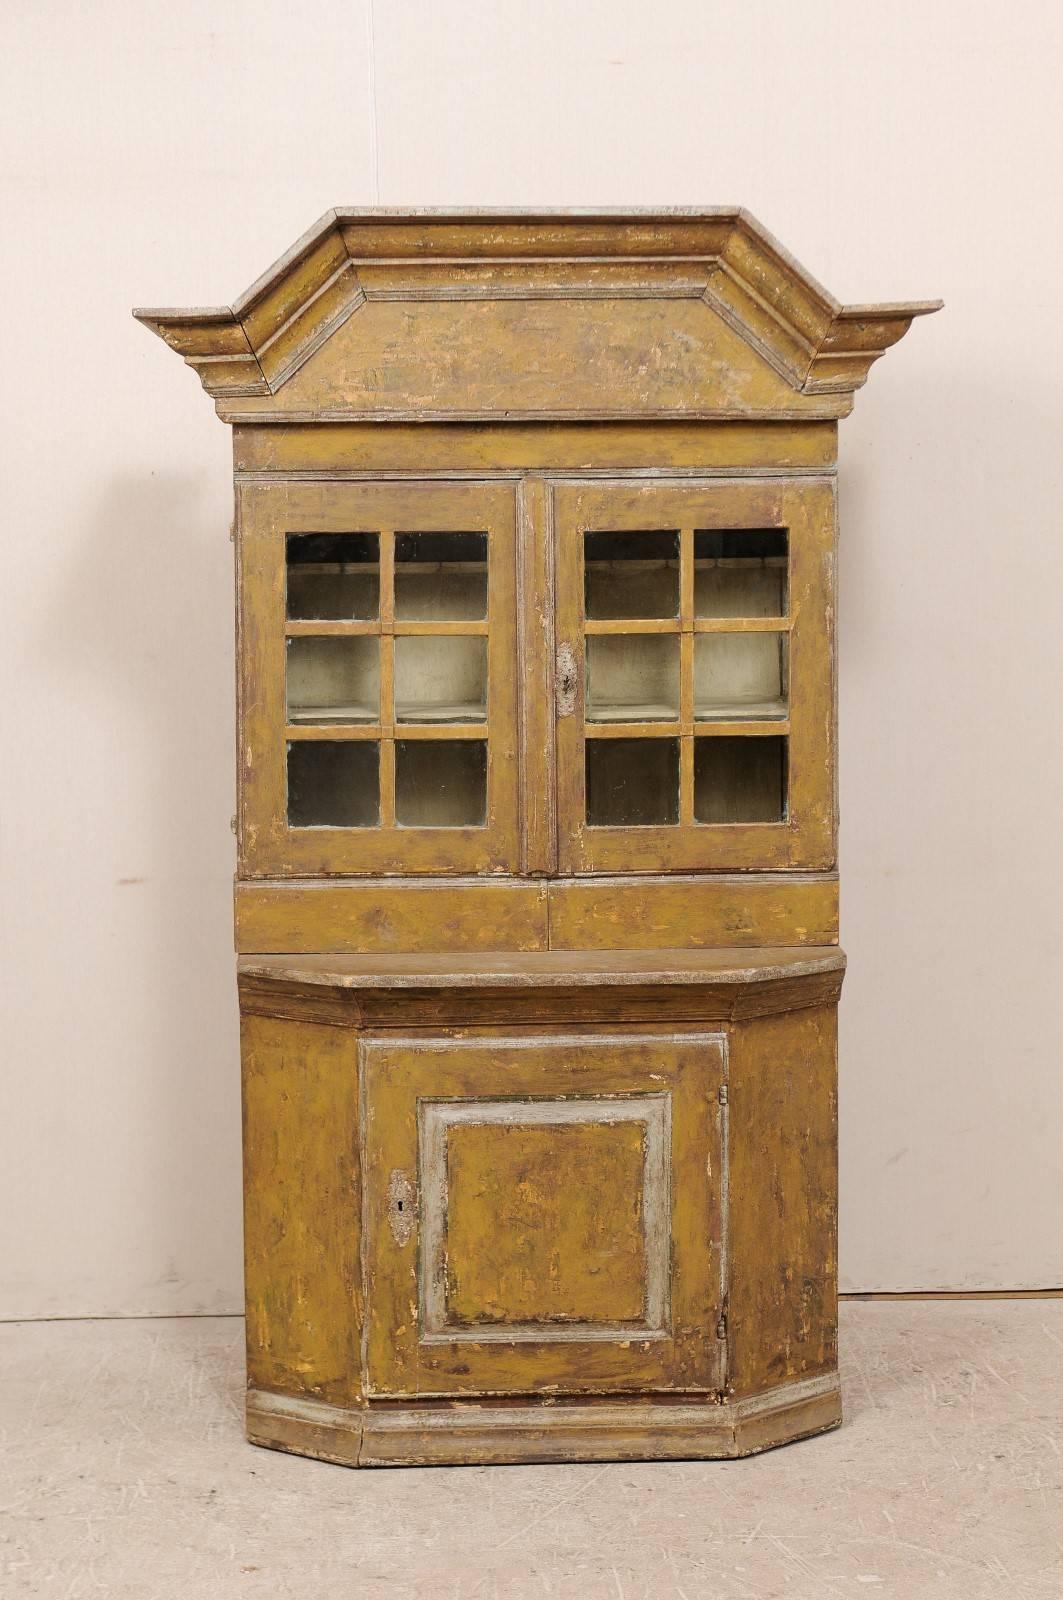 An 18th century Swedish cupboard. This Swedish cabinet, circa 1725-1750 is the perfect transition between Baroque and Rococo. The cupboard retains its original paint and hardware. This piece features a robustly trimmed pediment bonnet. There are two